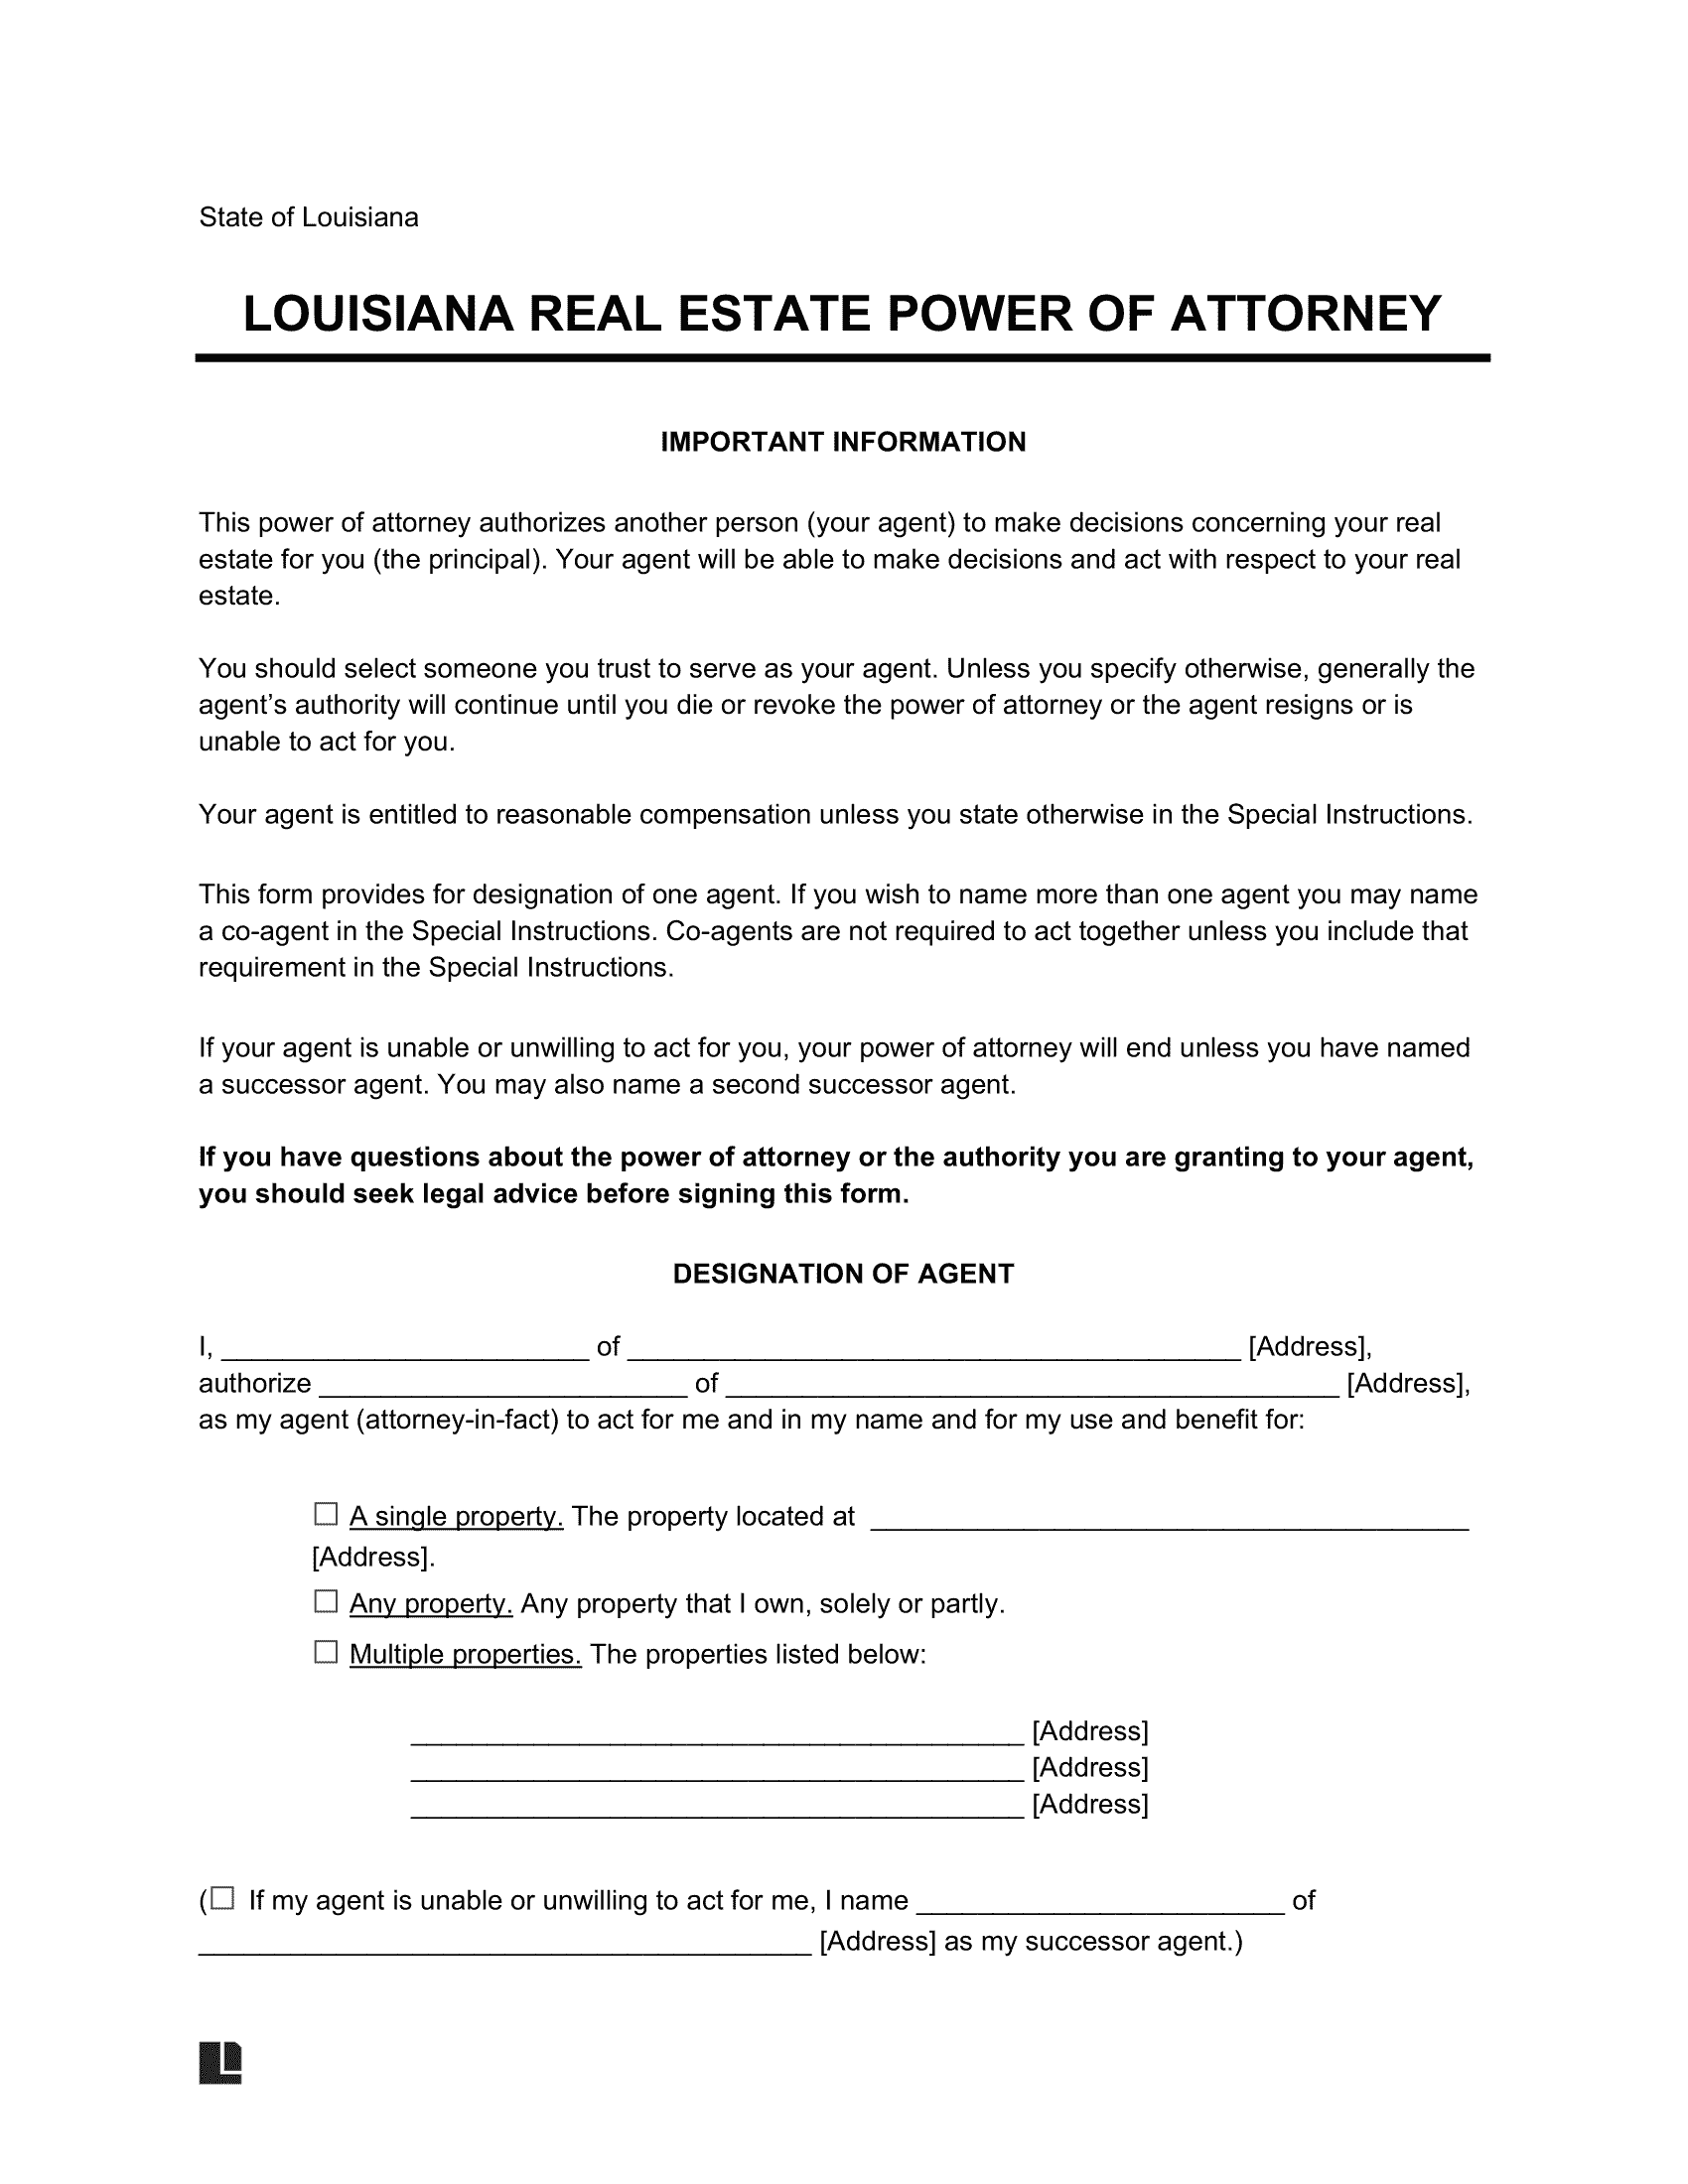 Louisiana Real Estate Power of Attorney Form